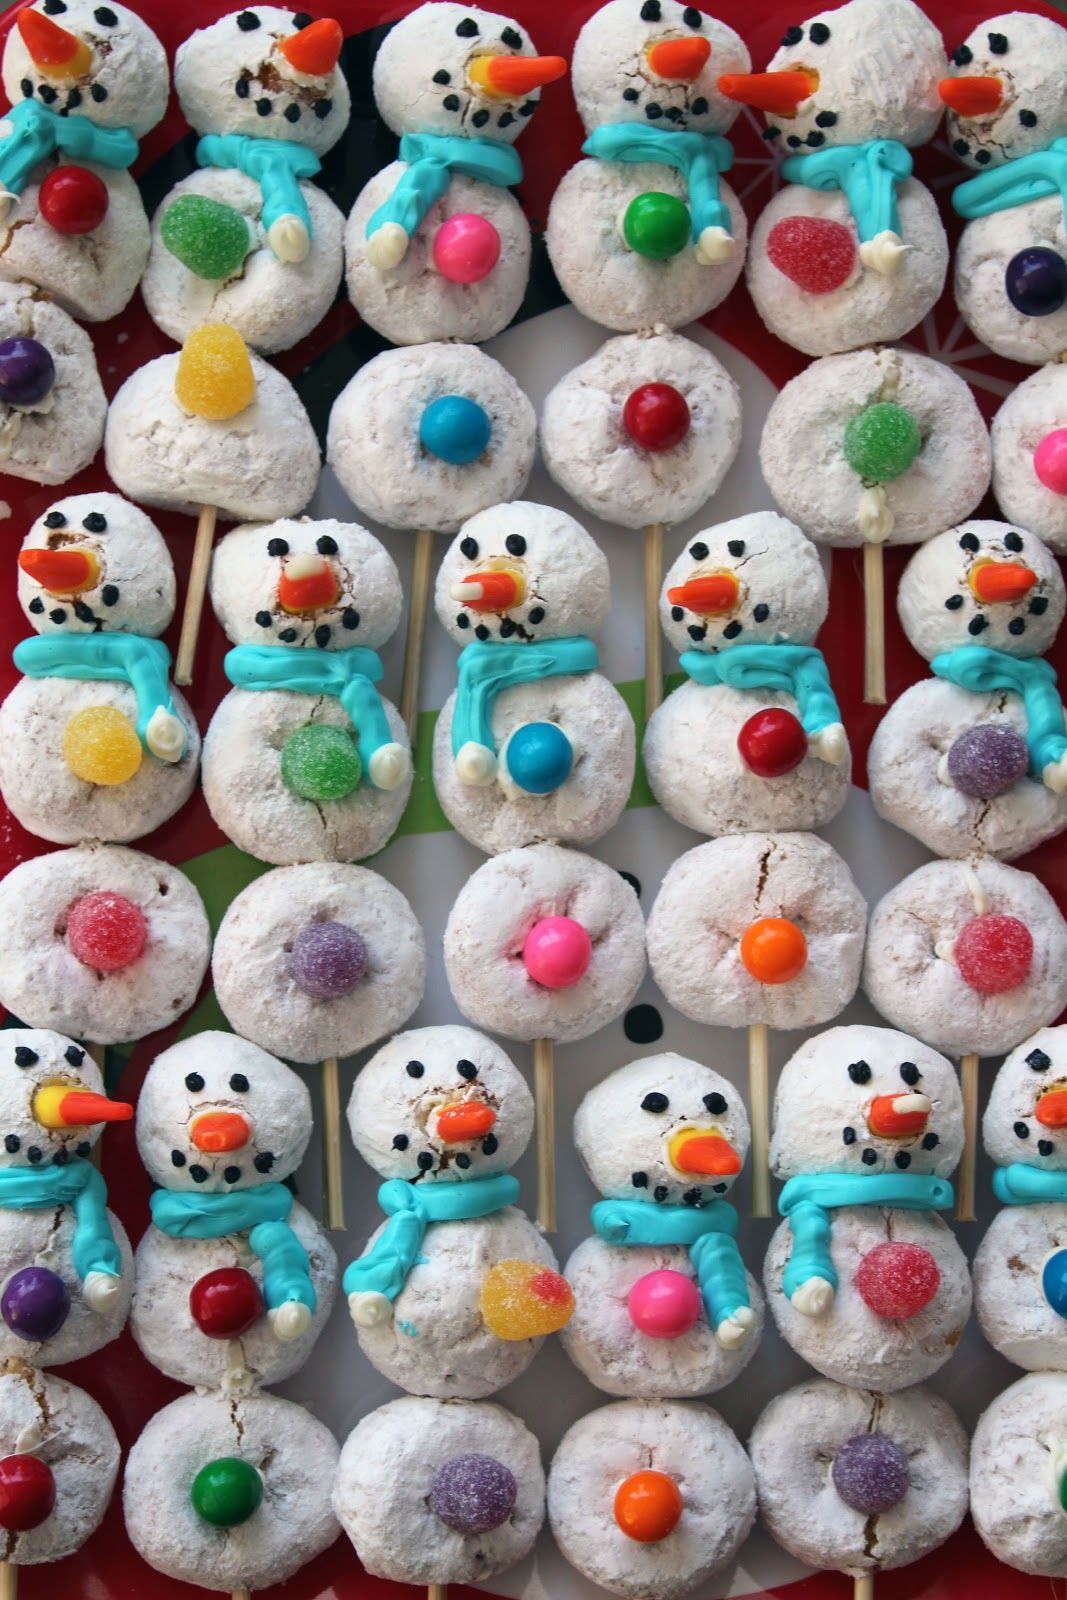 Powdered donut snowmen are a great edible craft that the kiddos can help with! @worthpinning -   25 edible christmas crafts
 ideas